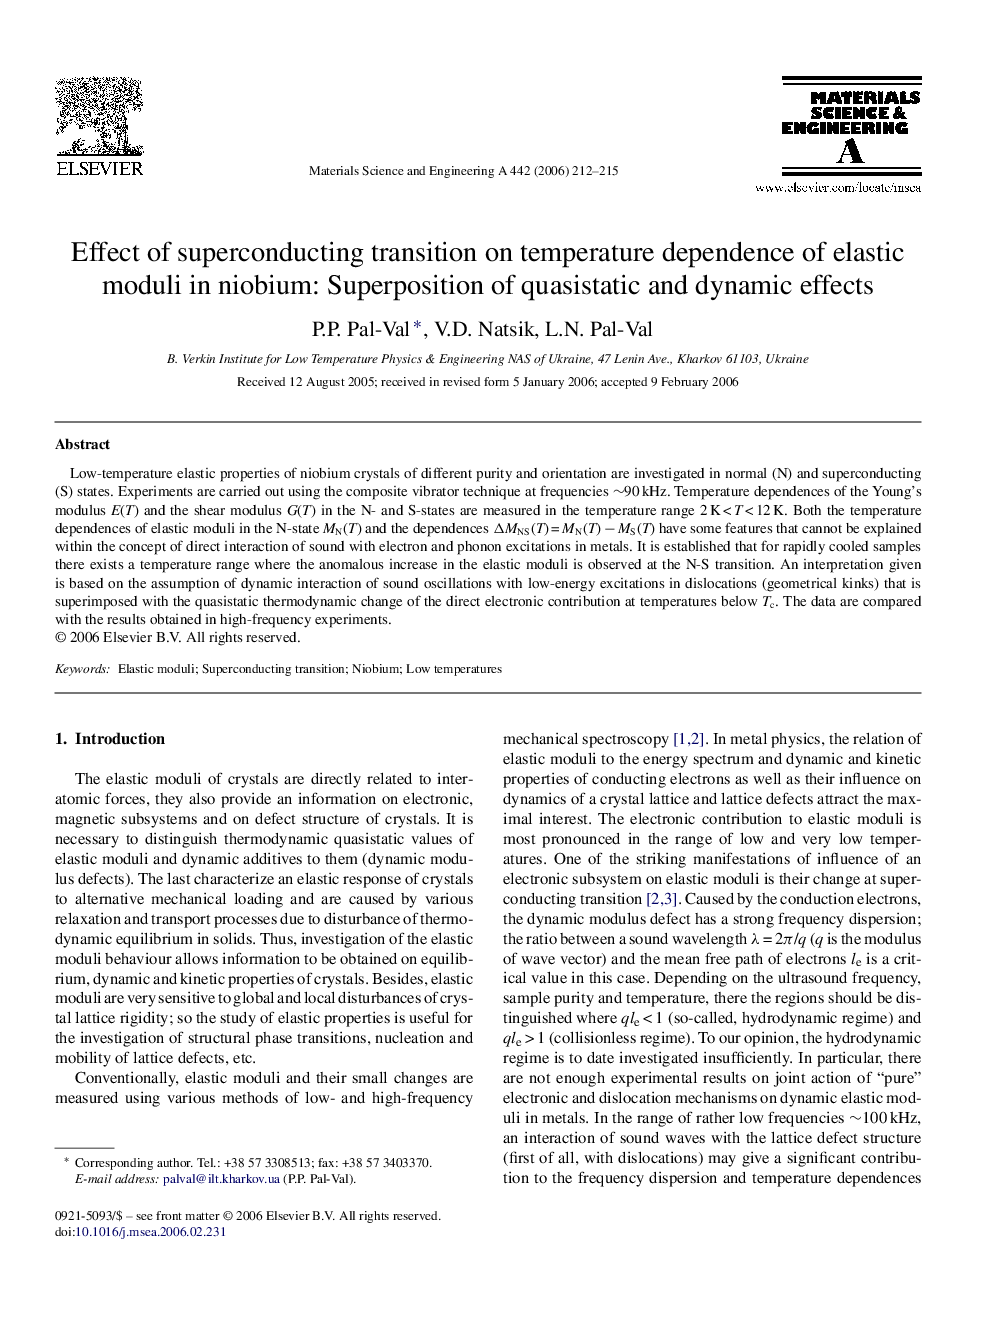 Effect of superconducting transition on temperature dependence of elastic moduli in niobium: Superposition of quasistatic and dynamic effects